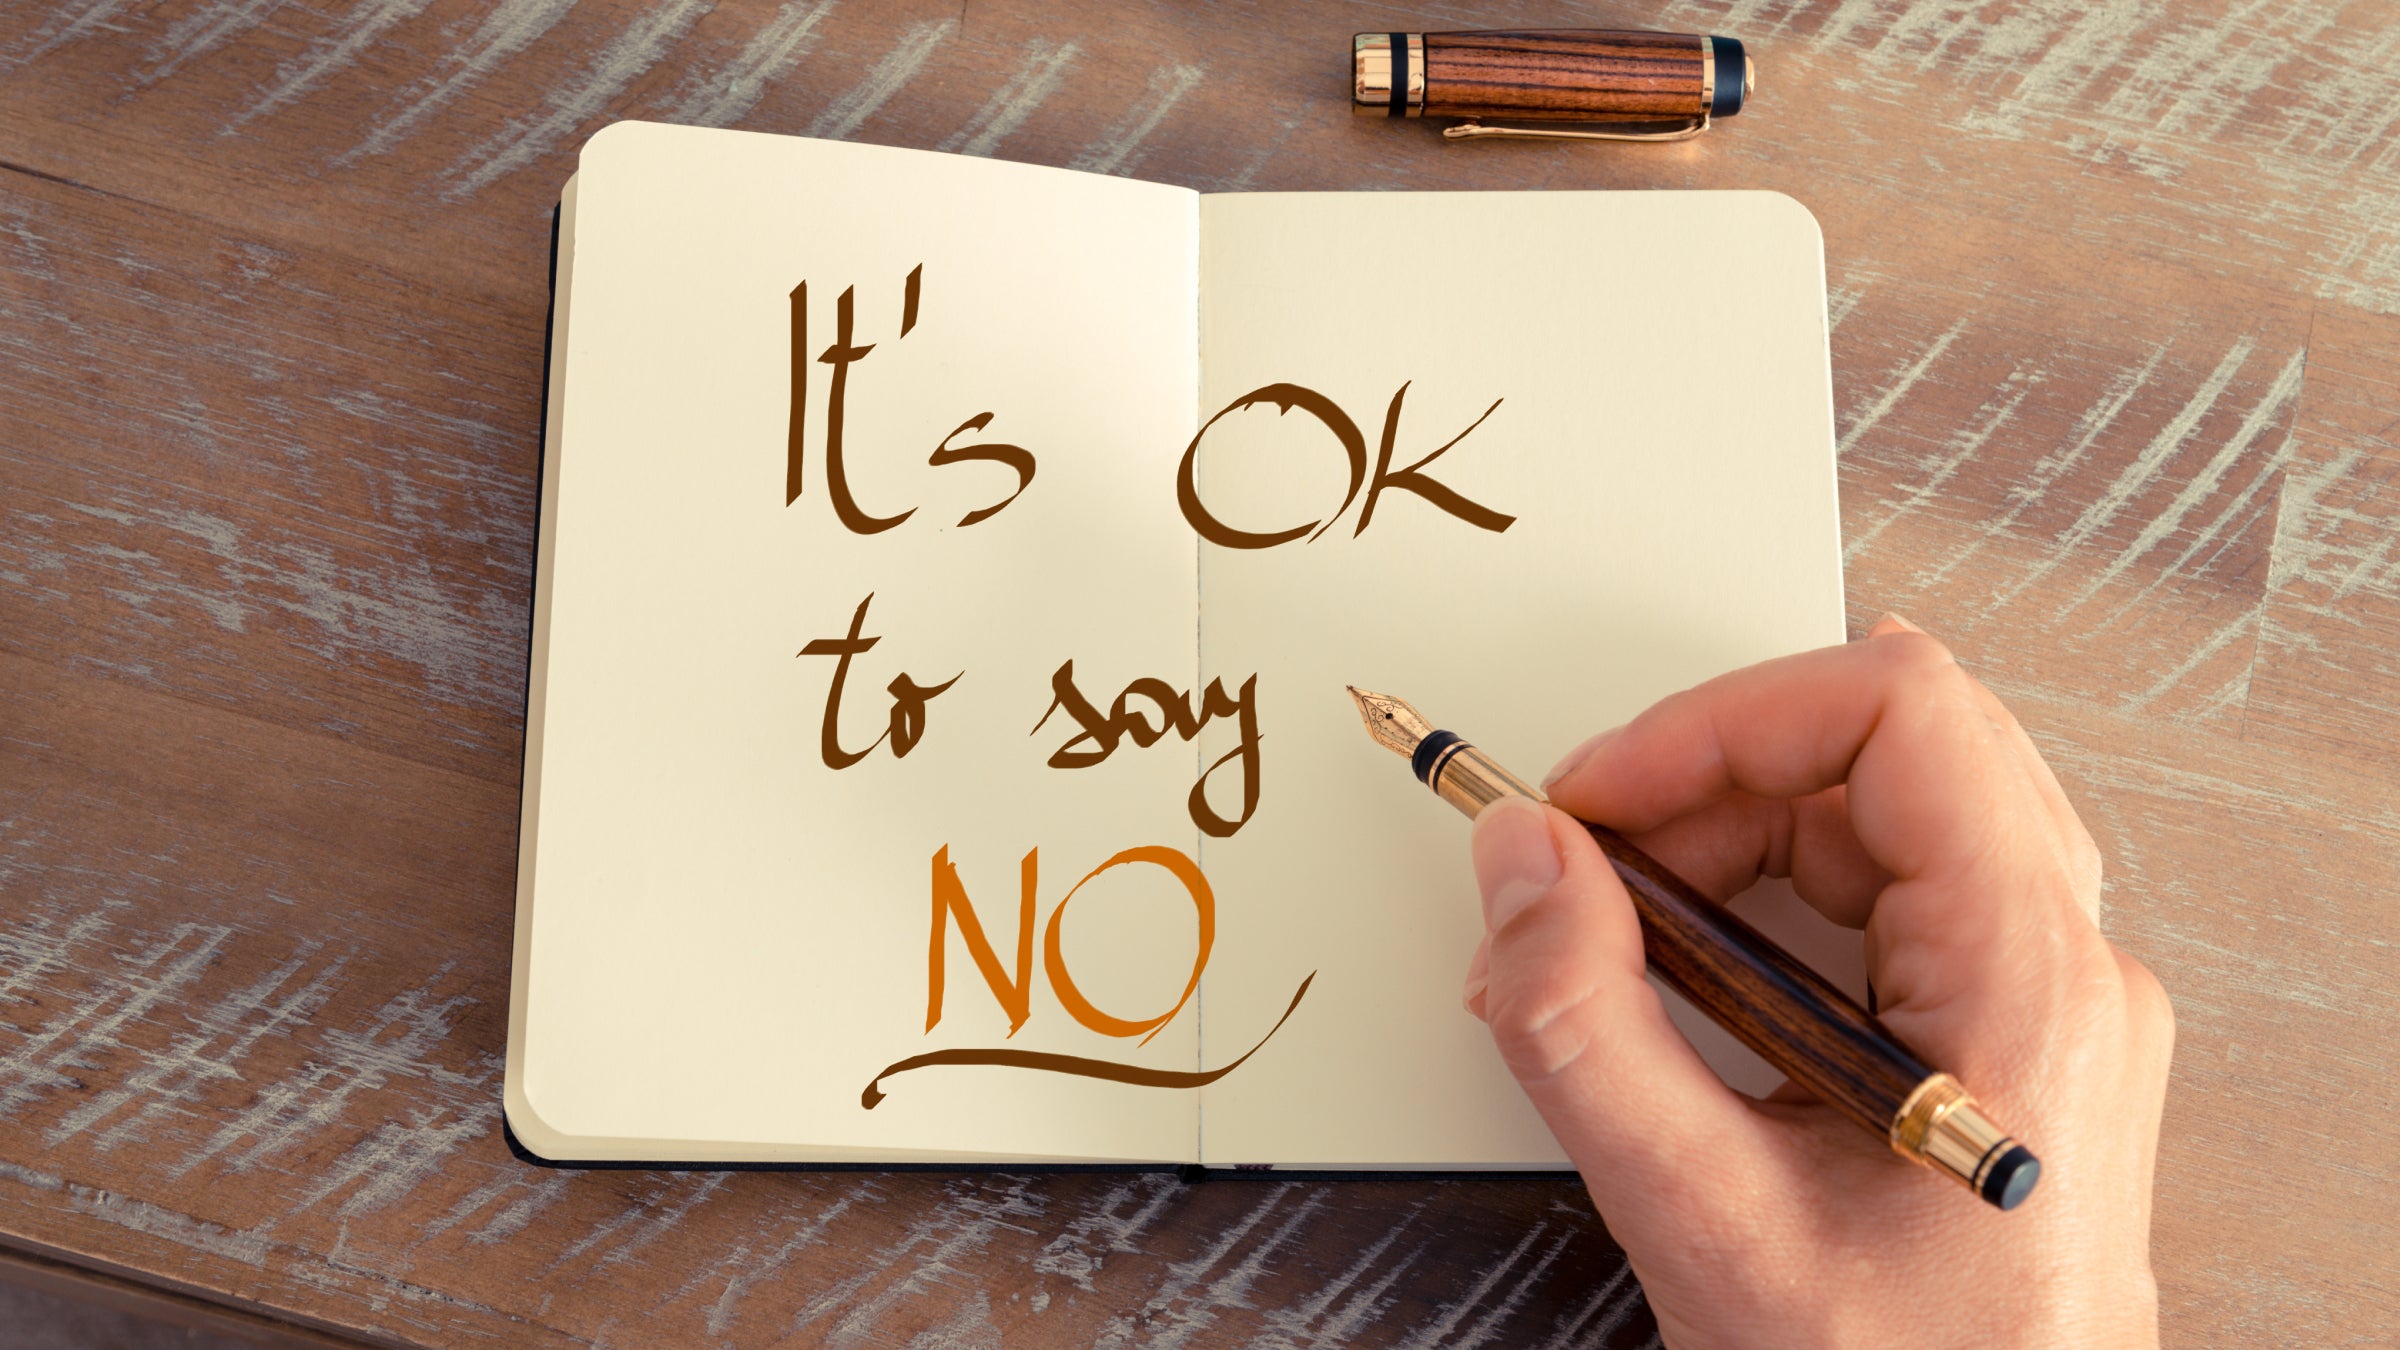 A hand writing in a journal that it's OK to say no